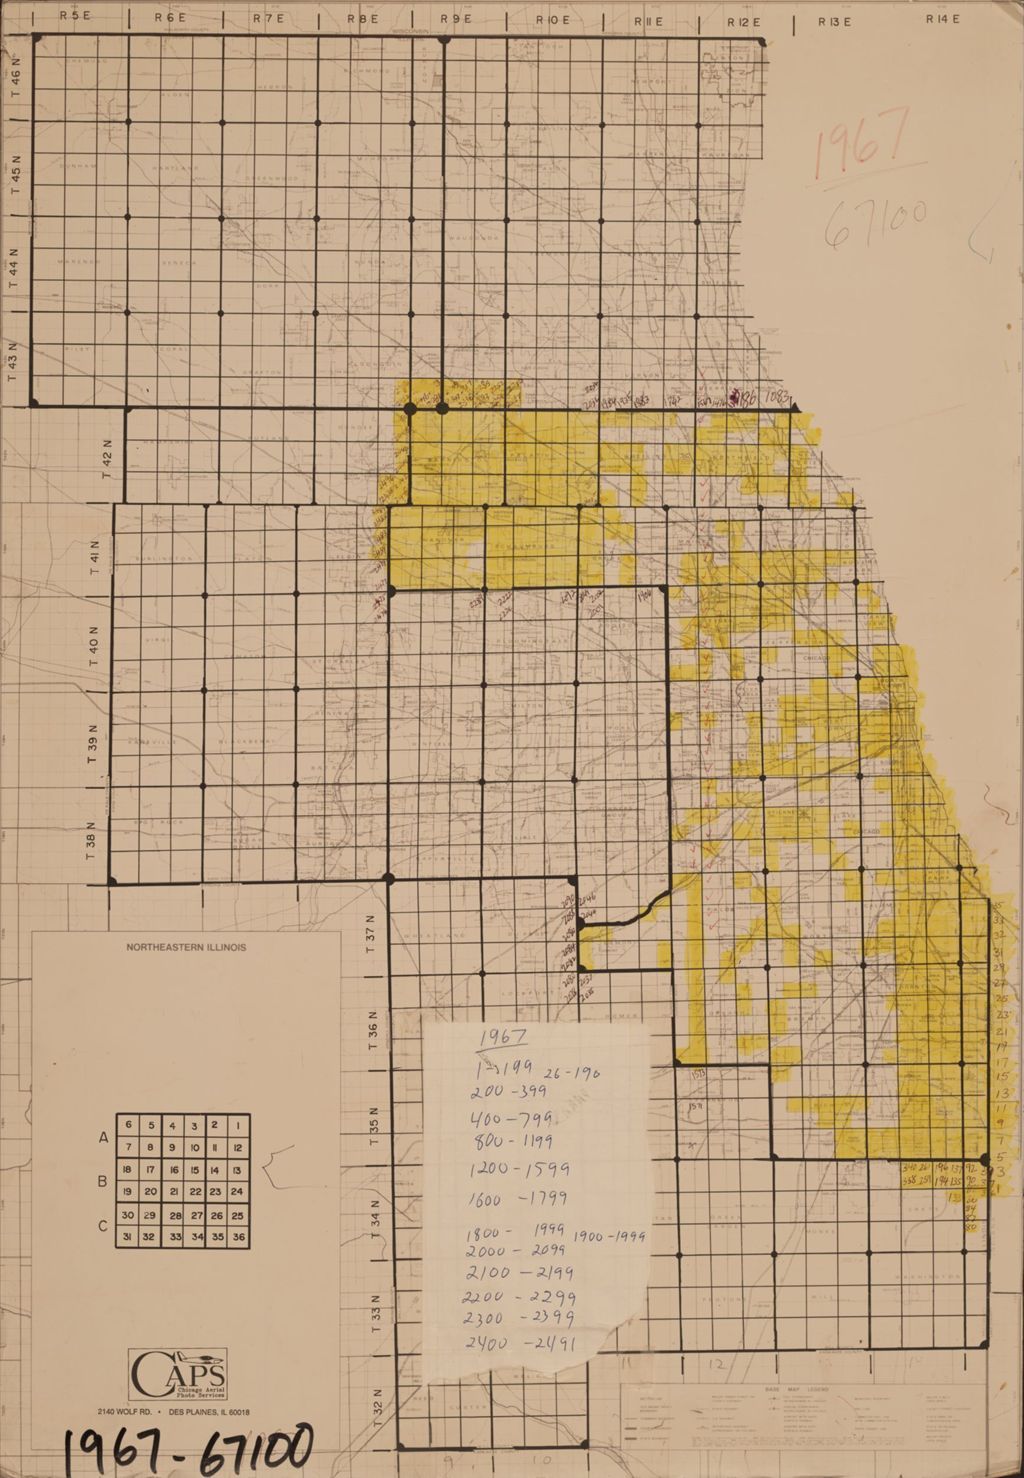 Miniature of Aerial survey index map for 1967 Cook County survey (67100)